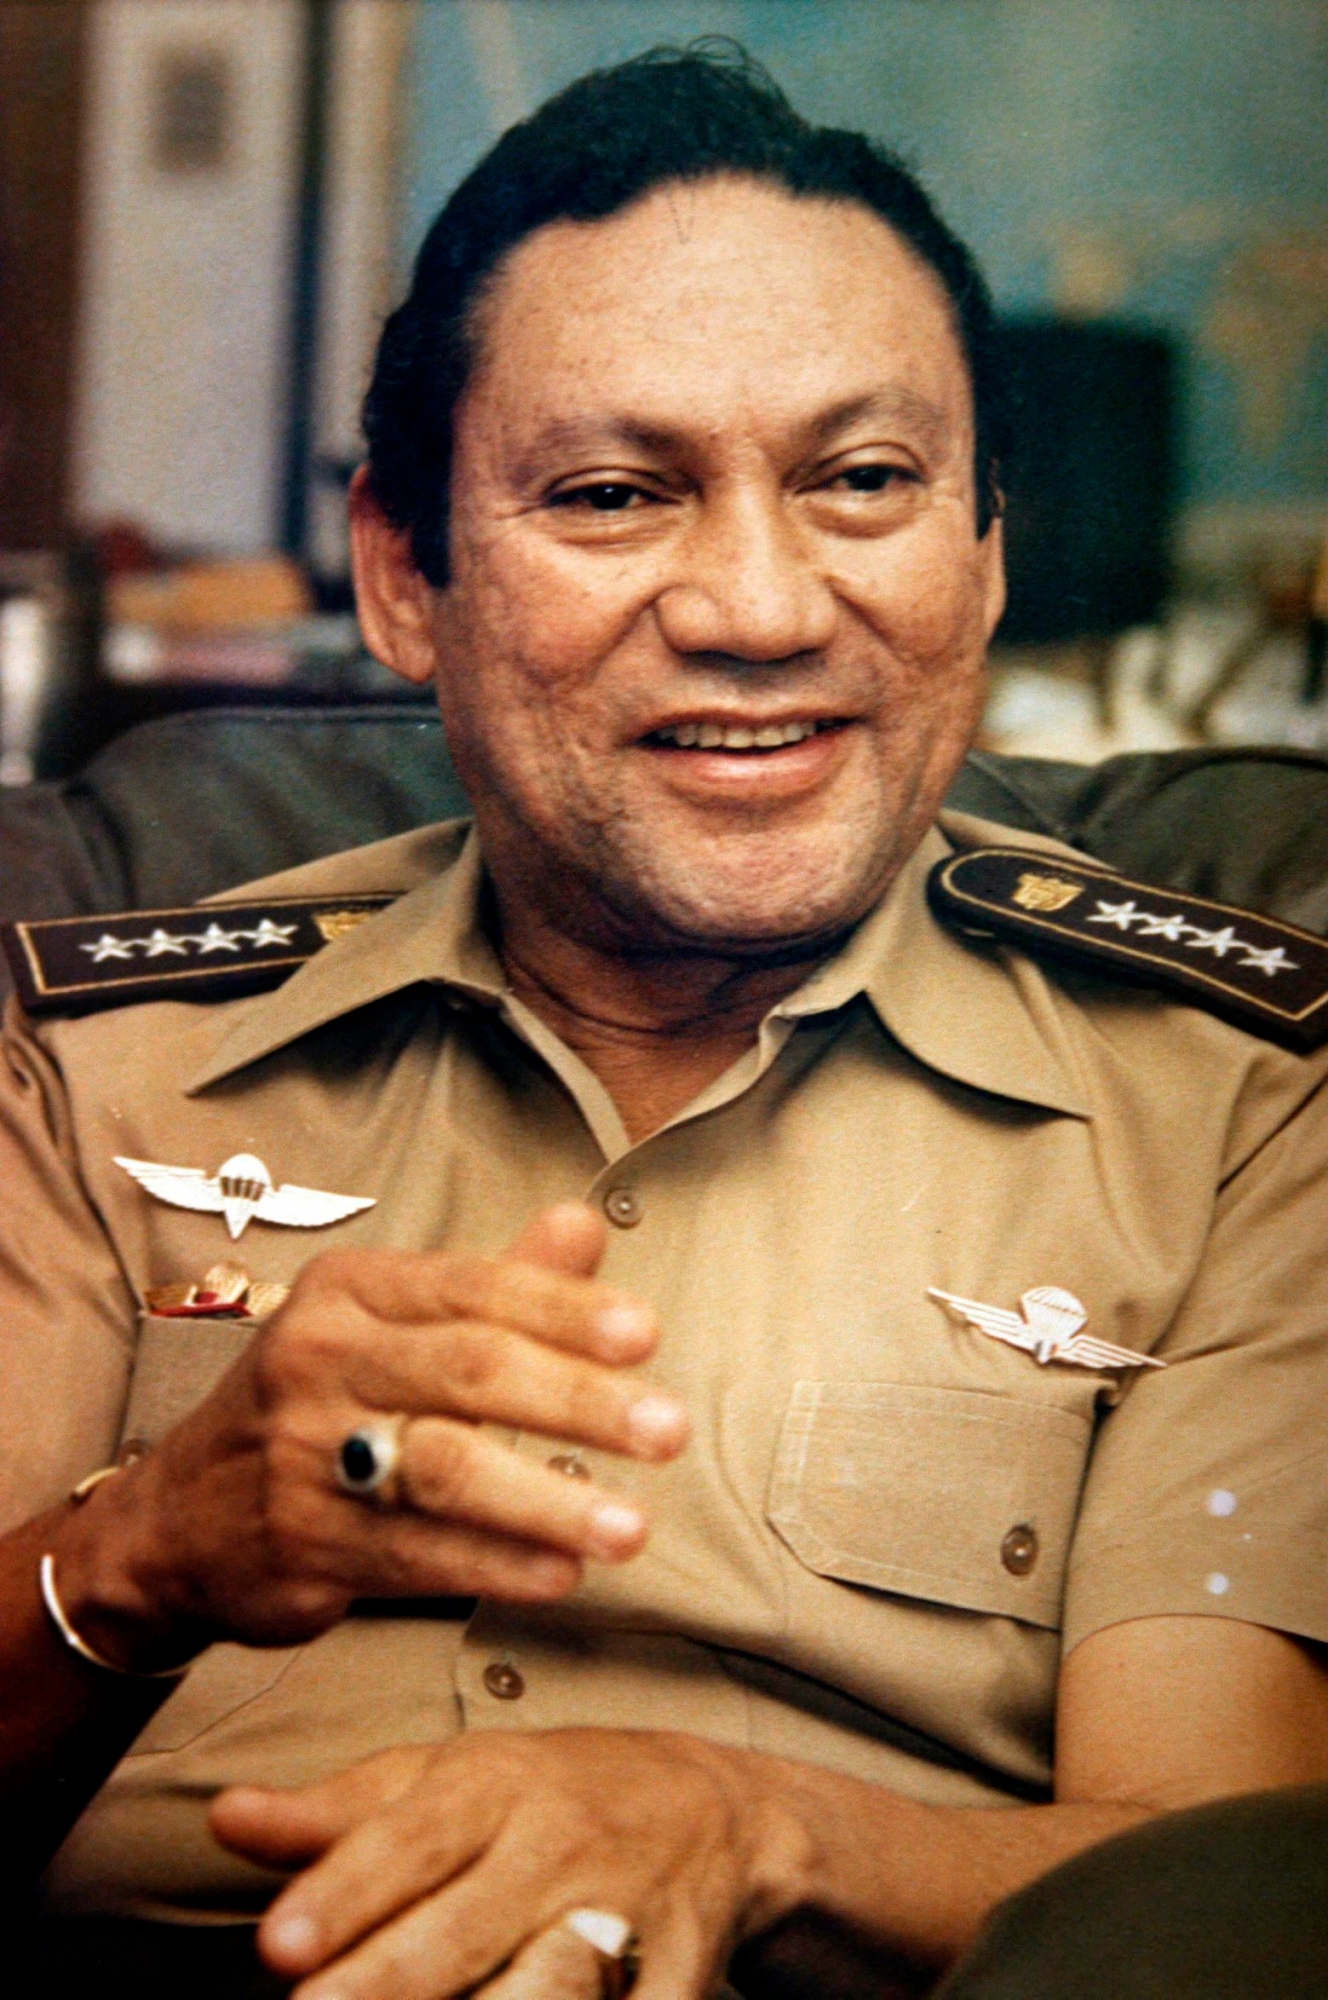 FILE - In this Nov. 8, 1989 file photo, Panamanian military strongman Gen. Manuel Noriega talks to reporters in Panama City. Panama's ex-dictator Noriega died Monday, May 29, 2017, in a hospital in Panama City. He was 83. (AP Photo, File) Panama Noriega Obit